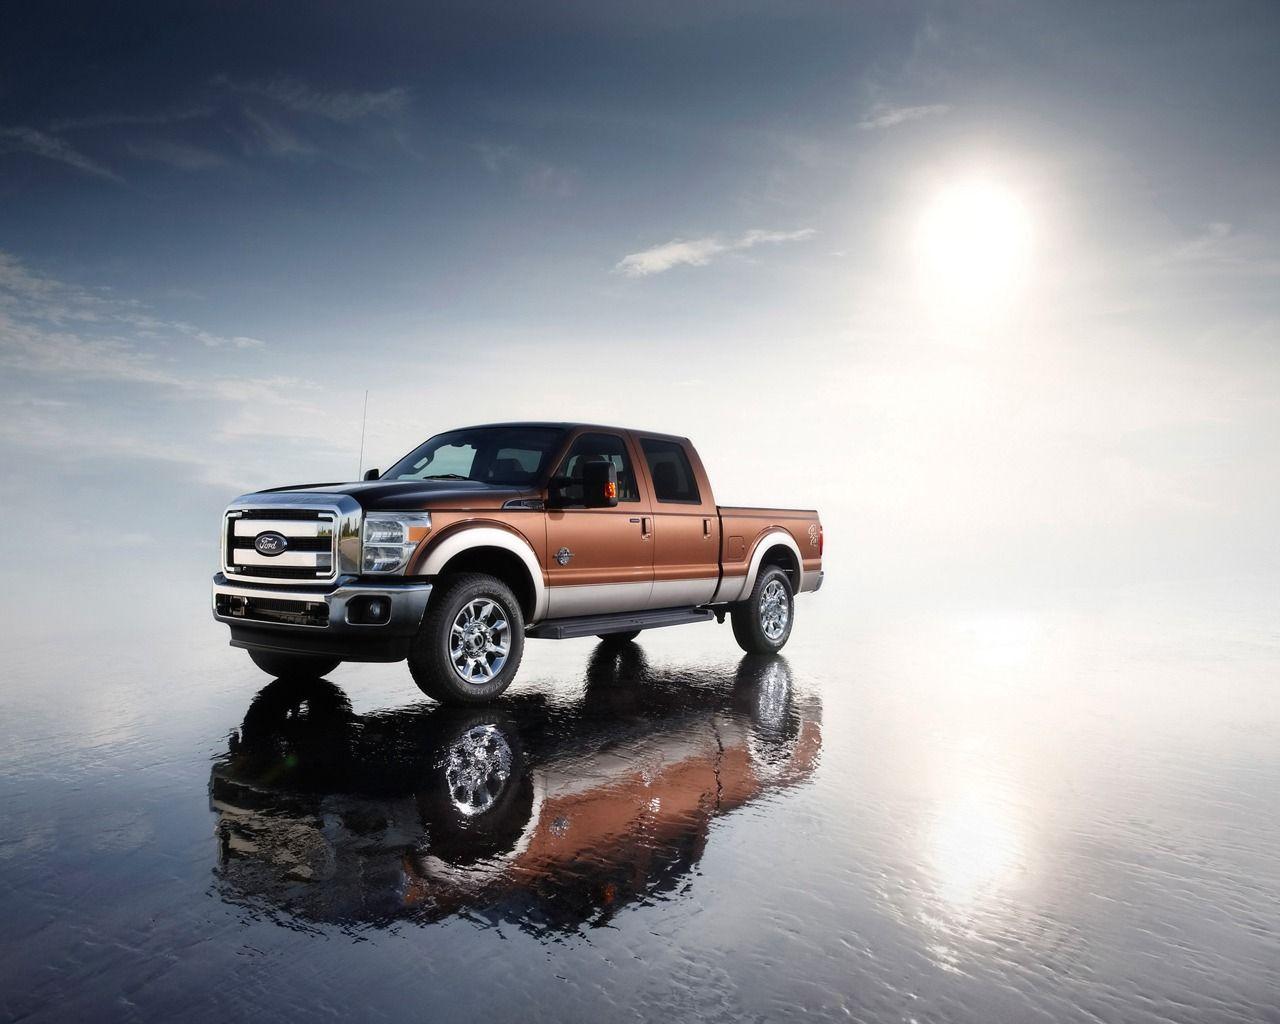 Ford Truck Wallpaper, HD Image Ford Truck Collection, Wallpaper Web